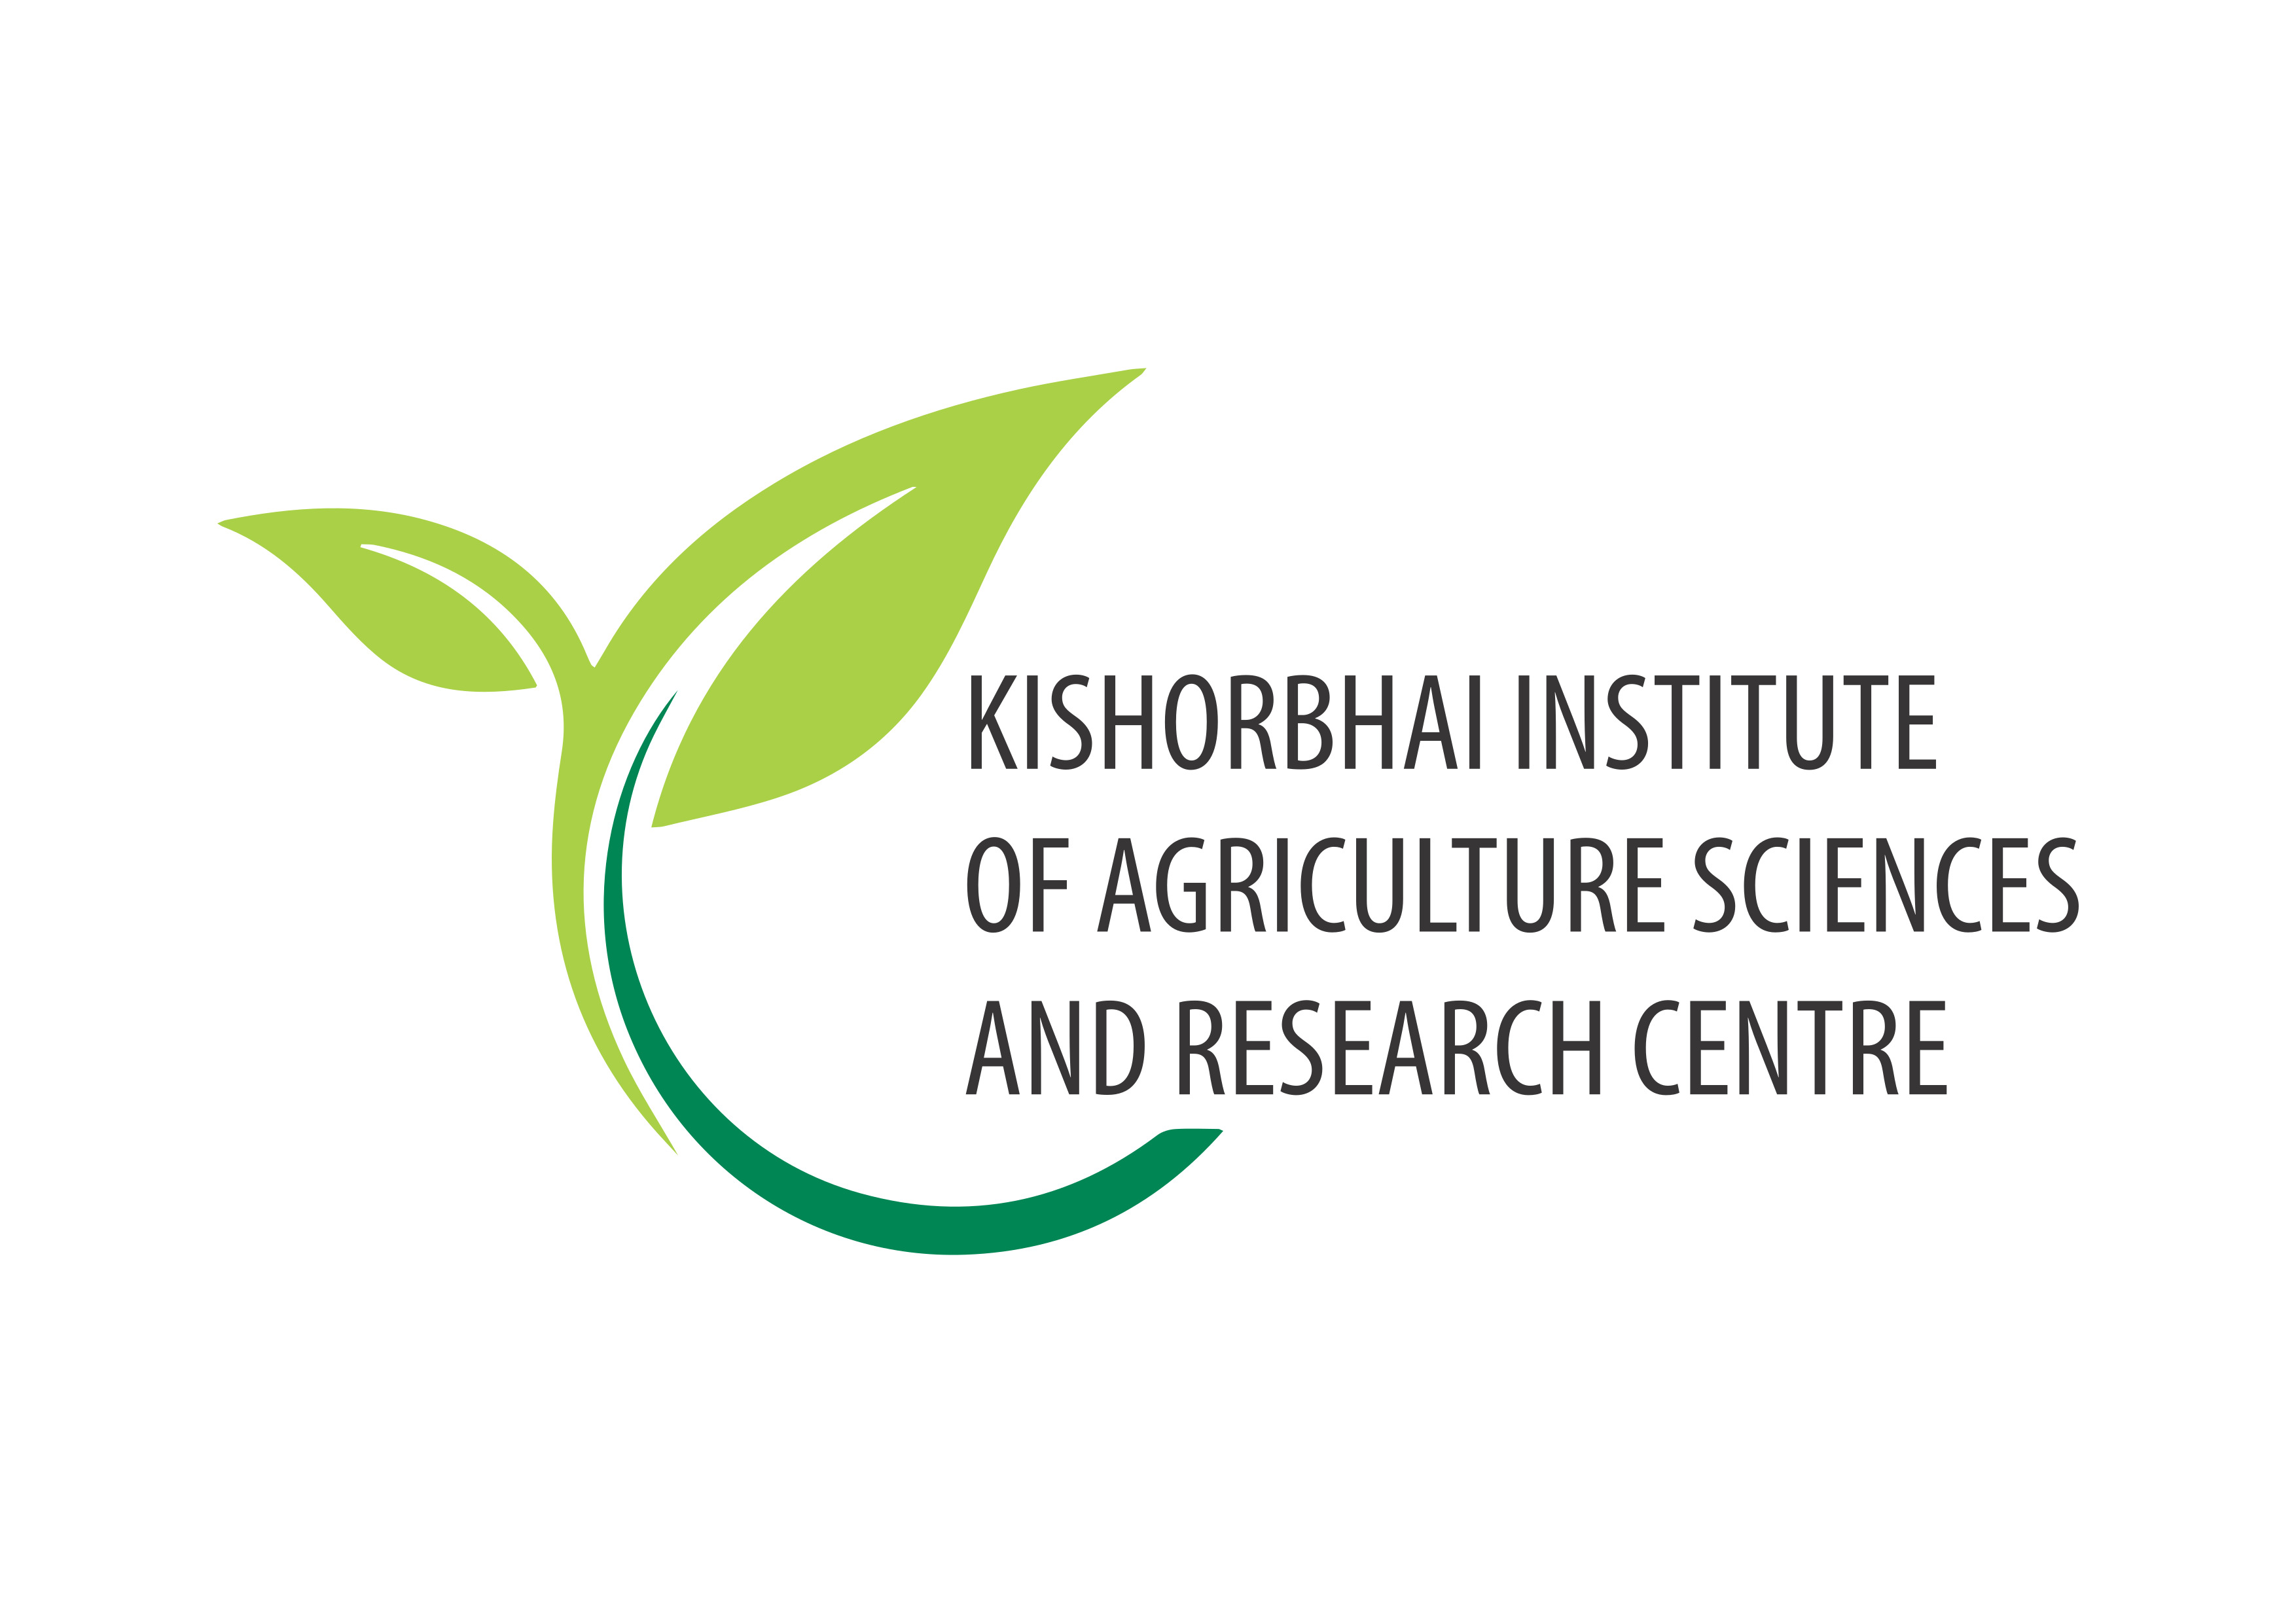 Kishorbhai Institute of Agriculture Sciences and Research Centre